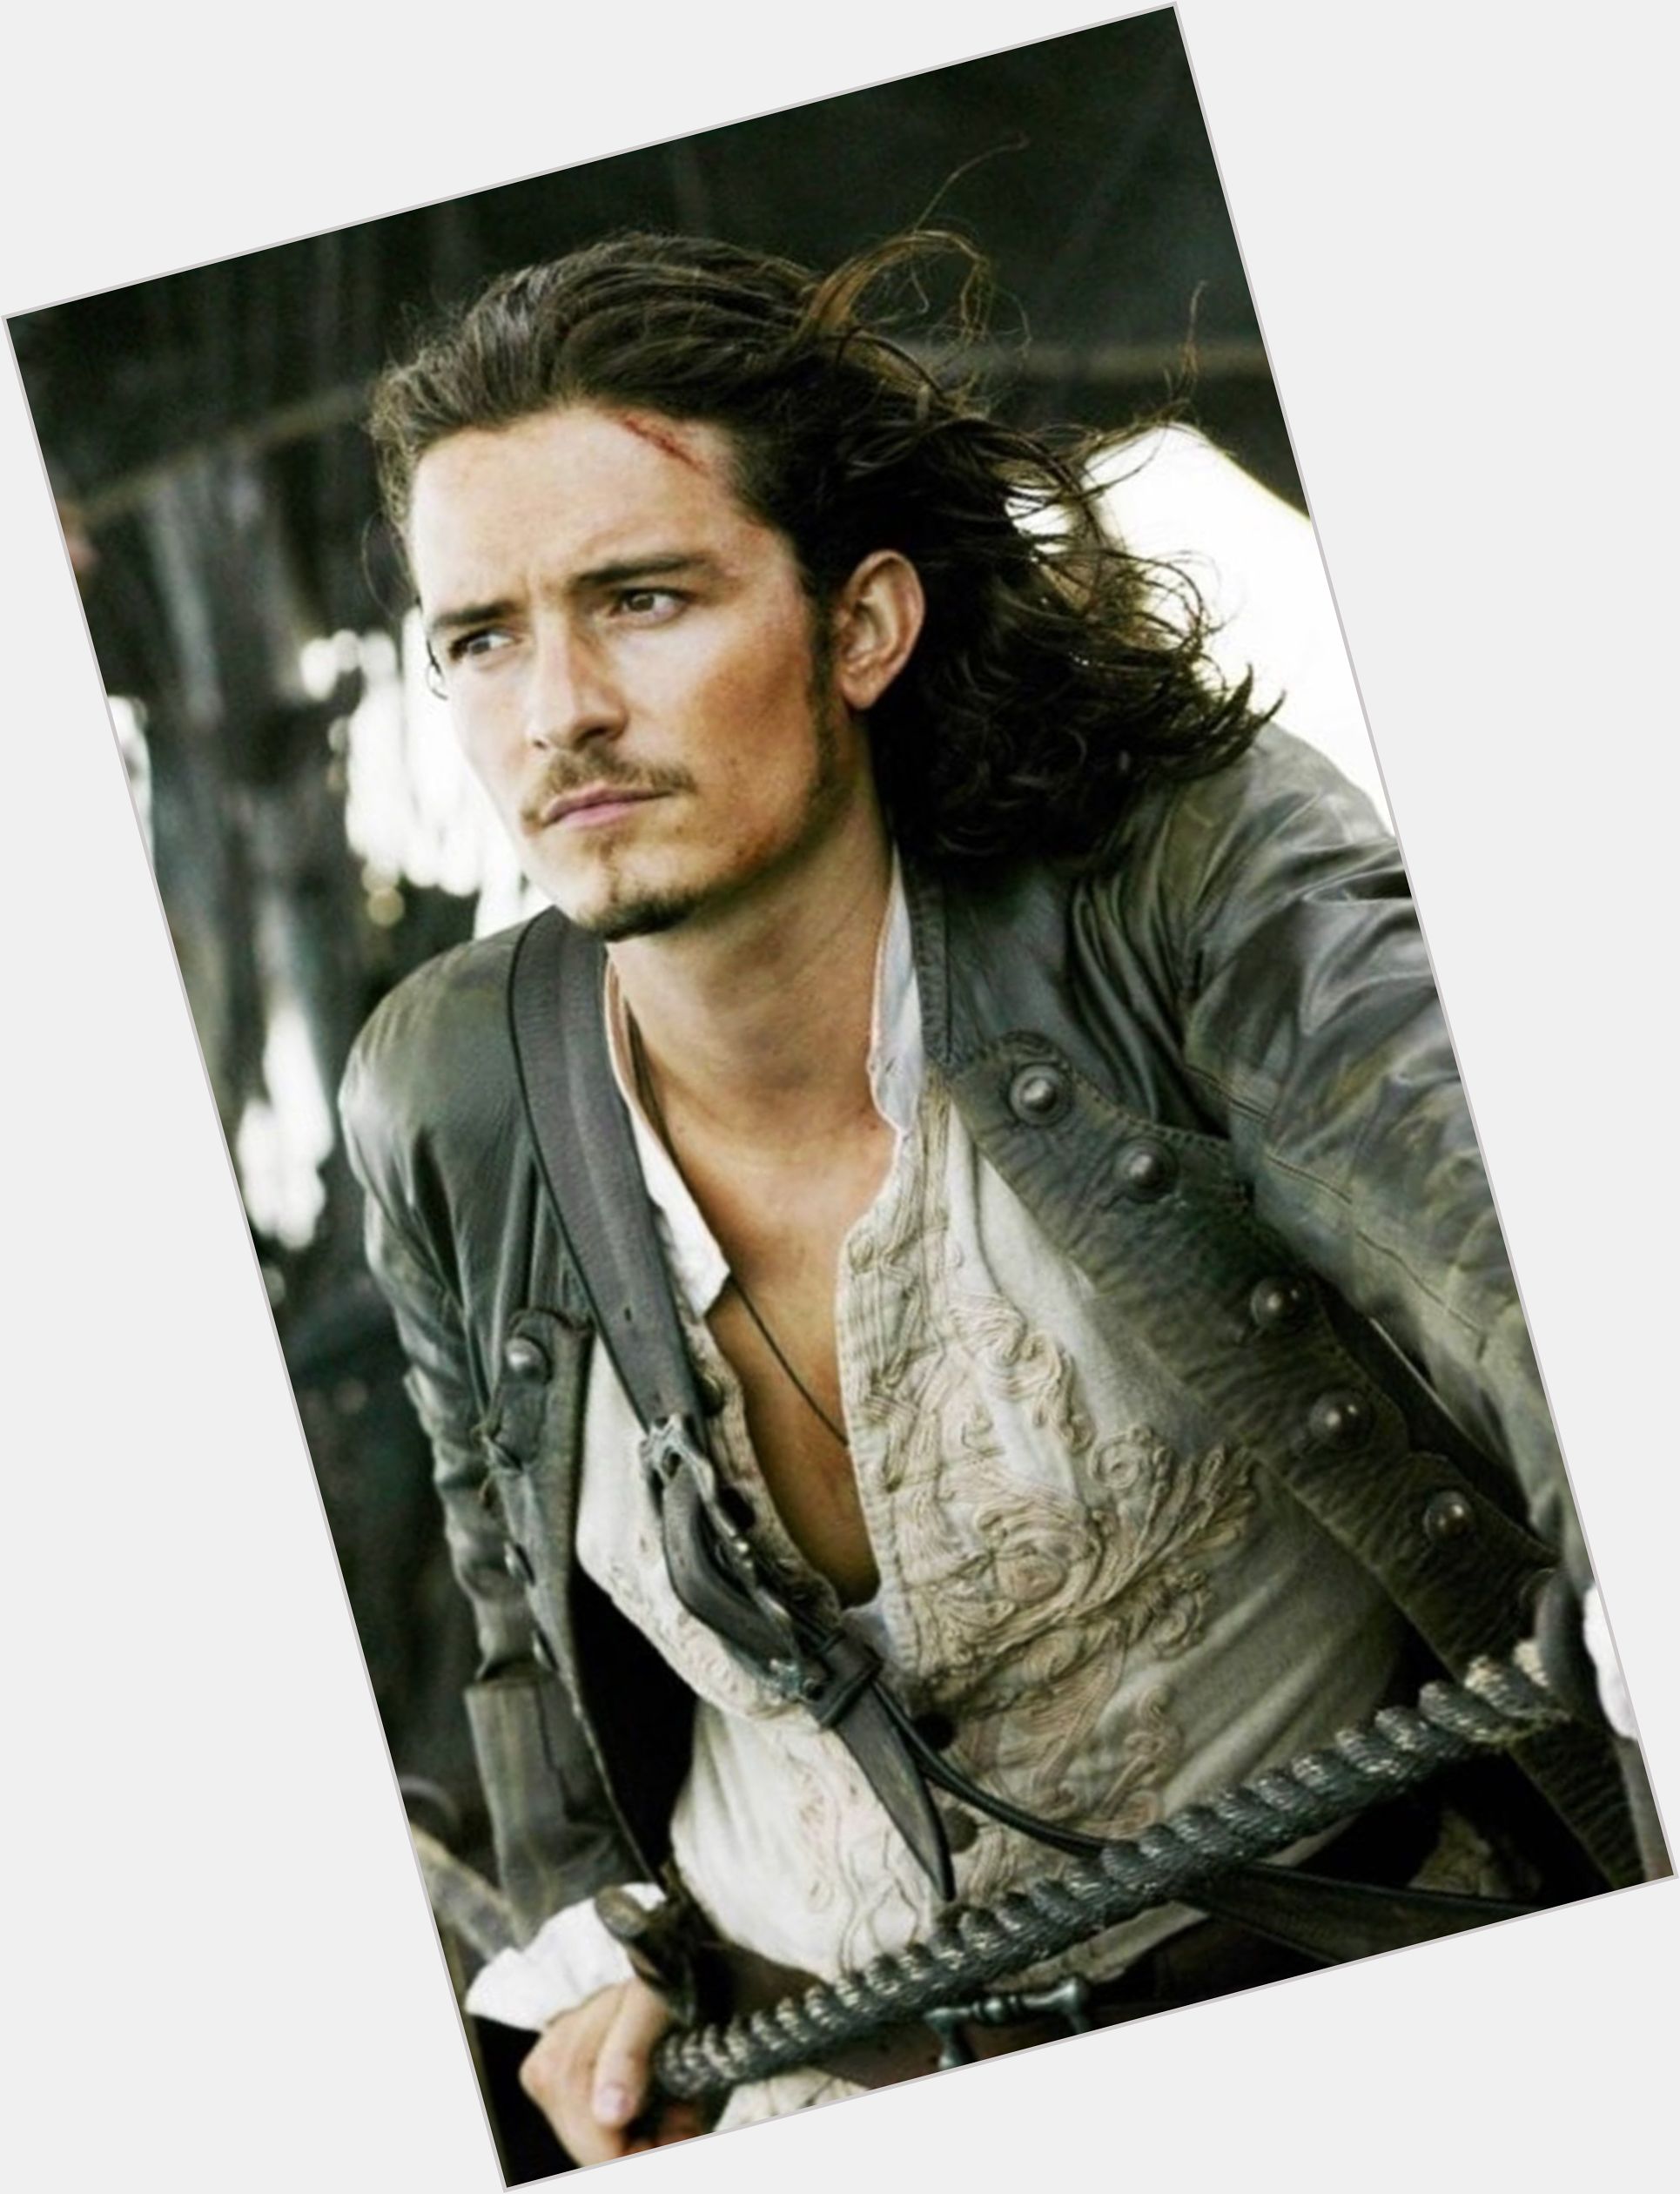 Will Turner exclusive hot pic 3.jpg